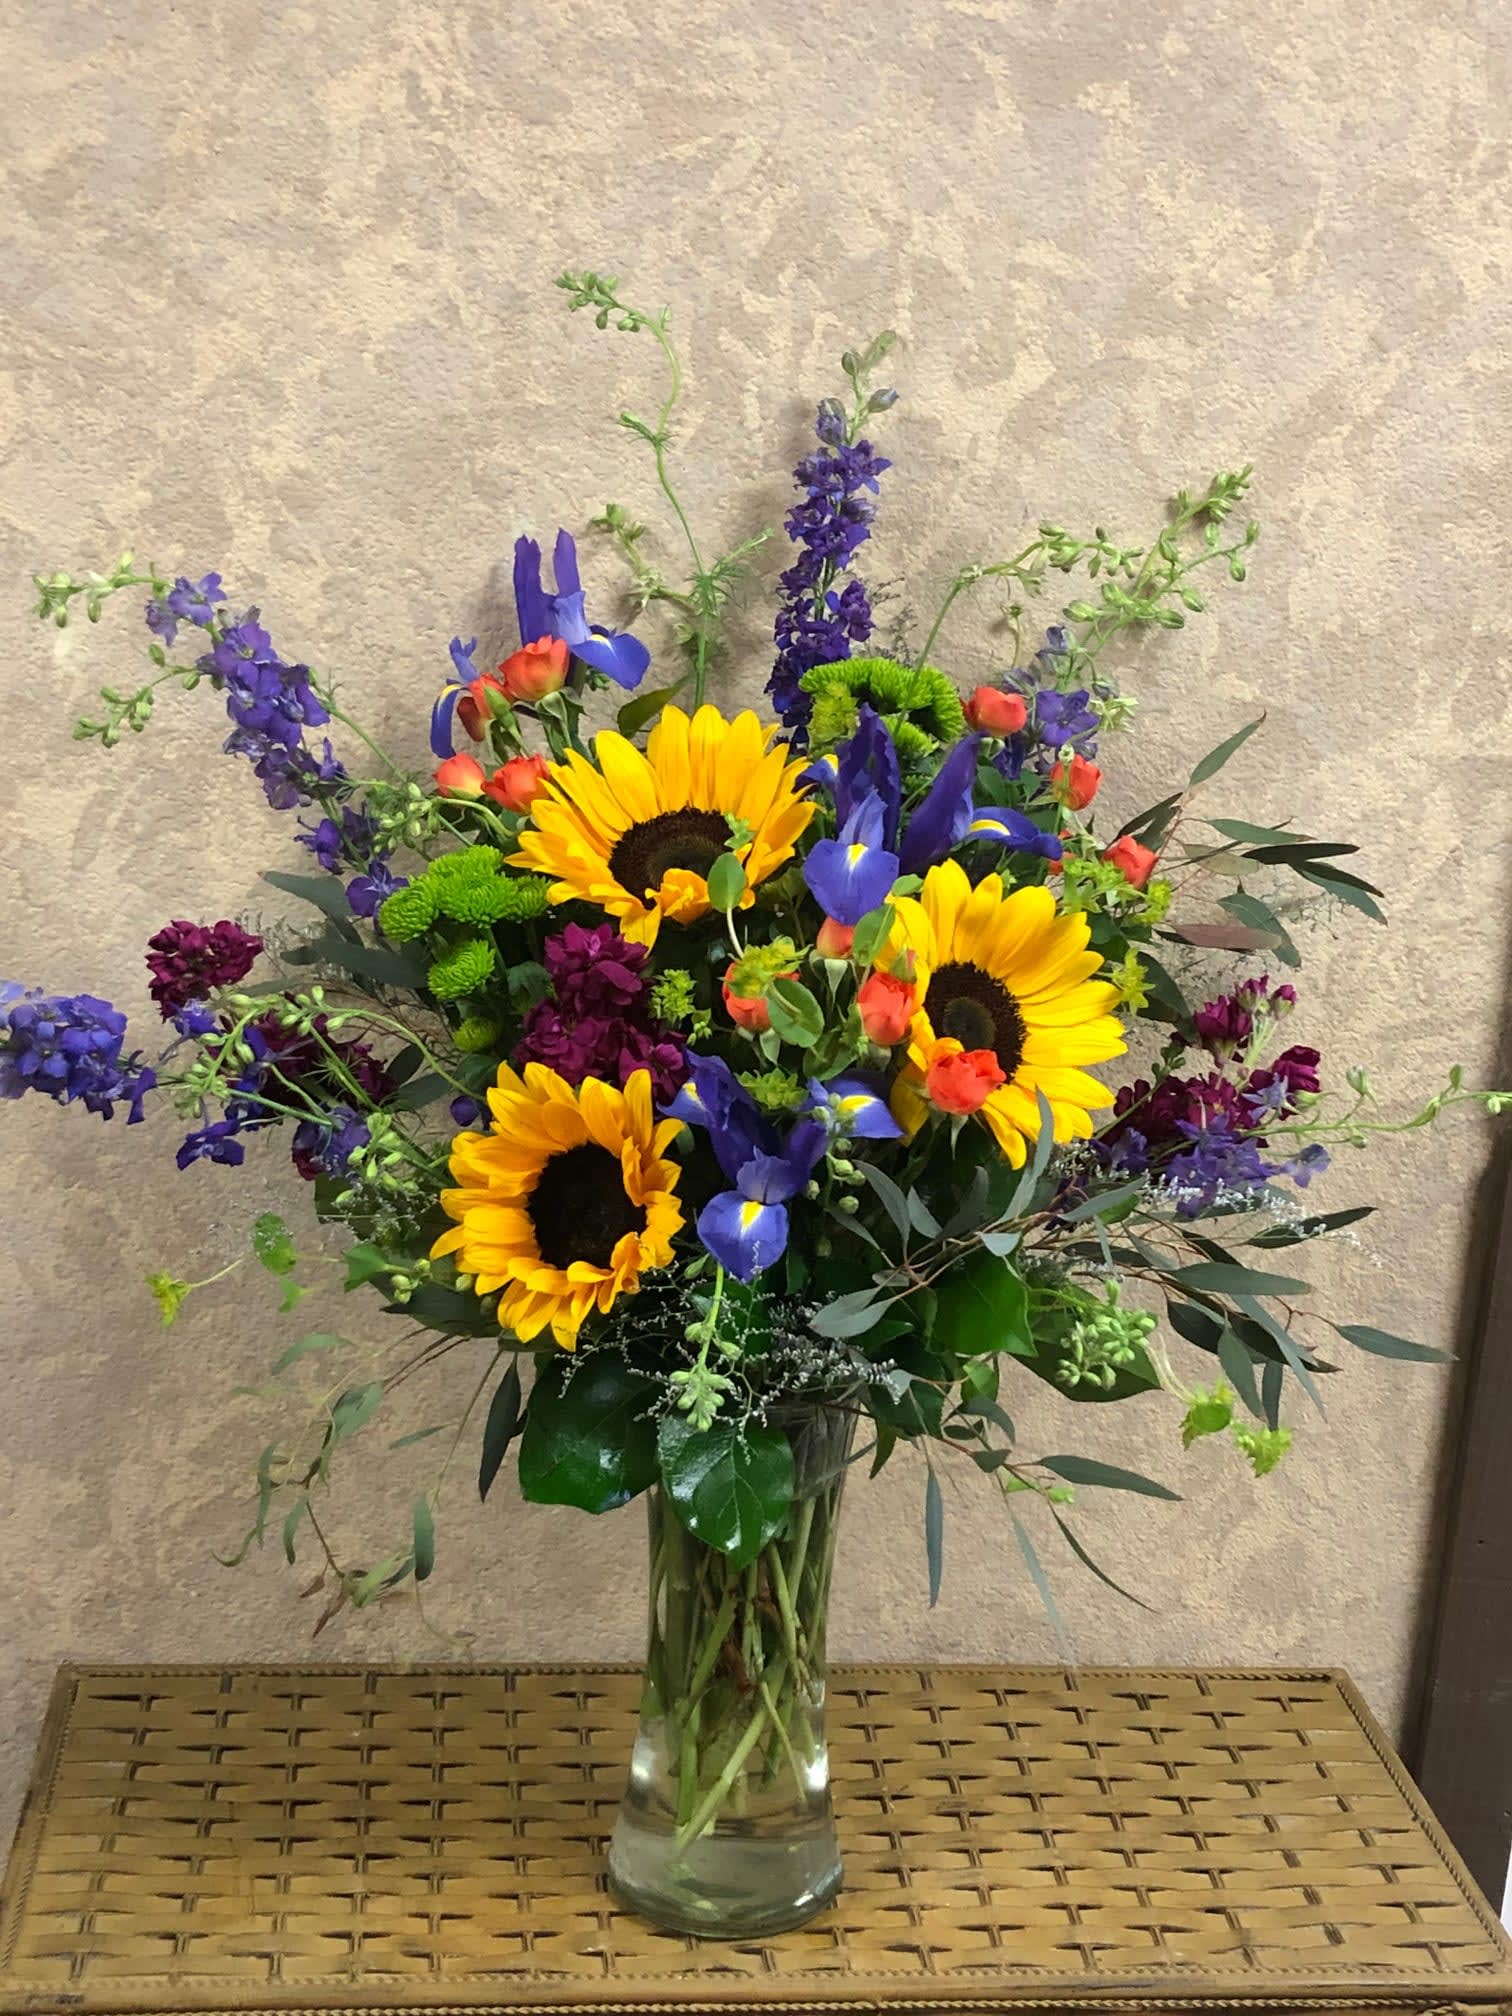 Summer Iris - Recipe: Purple Larkspur, Sunflowers, Purple Iris, Orange Spray Roses, Burgundy Stock, Green buttons, and greens in a tall vase. Availability: All year round Substitute Available: Yes Design View: Symmetric Front Facing View Photo shown: Regular